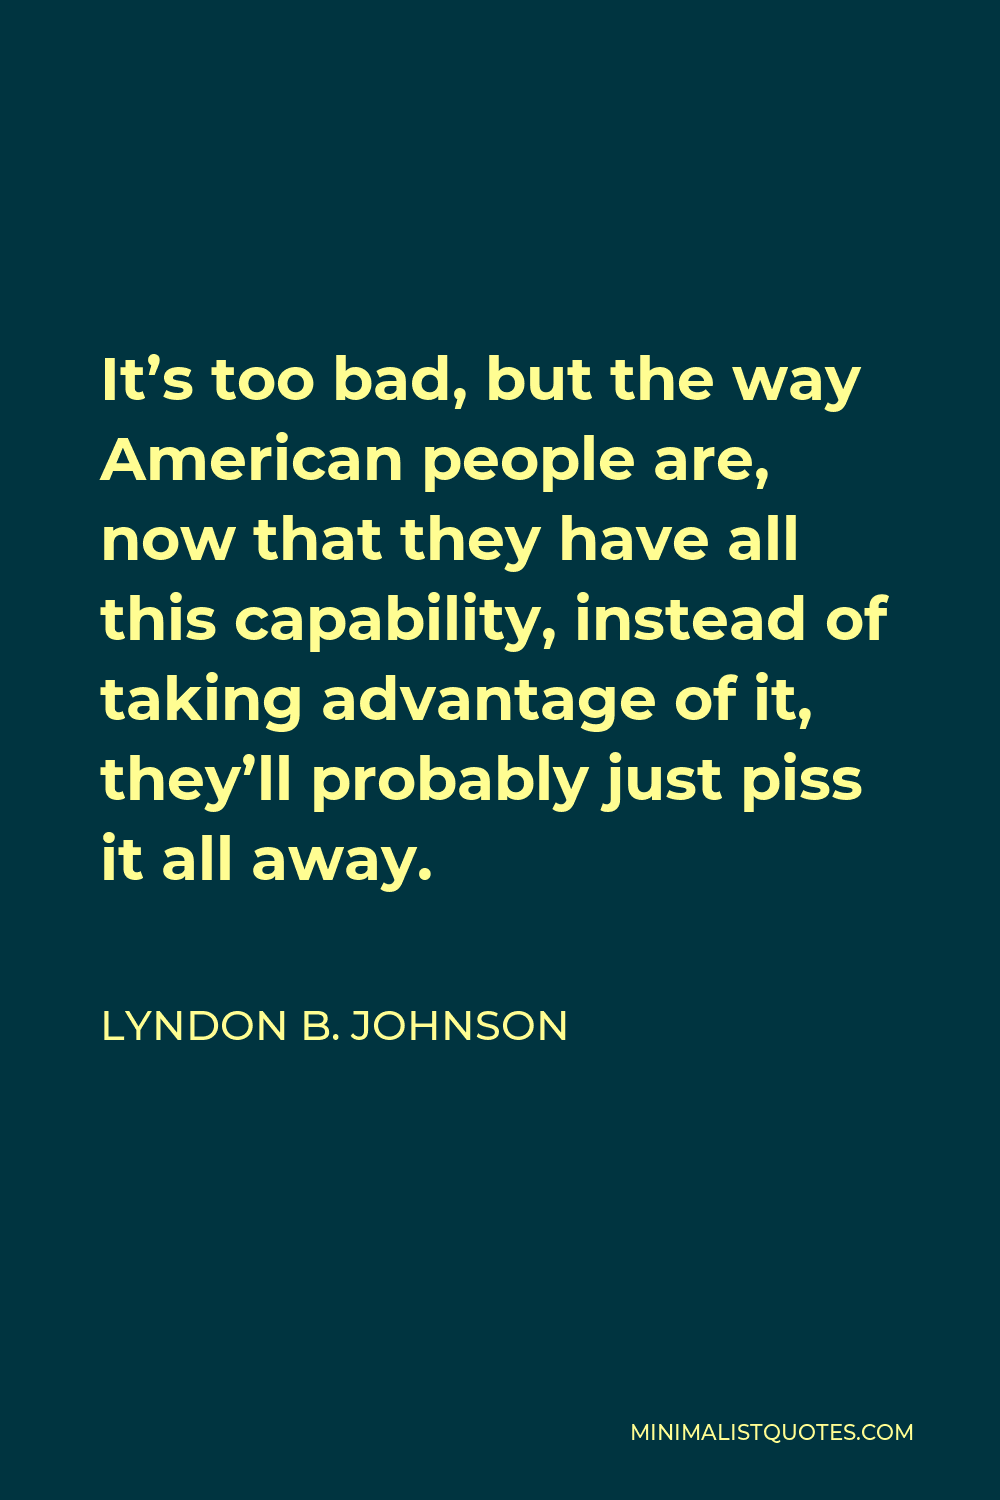 Lyndon B. Johnson Quote - It’s too bad, but the way American people are, now that they have all this capability, instead of taking advantage of it, they’ll probably just piss it all away.